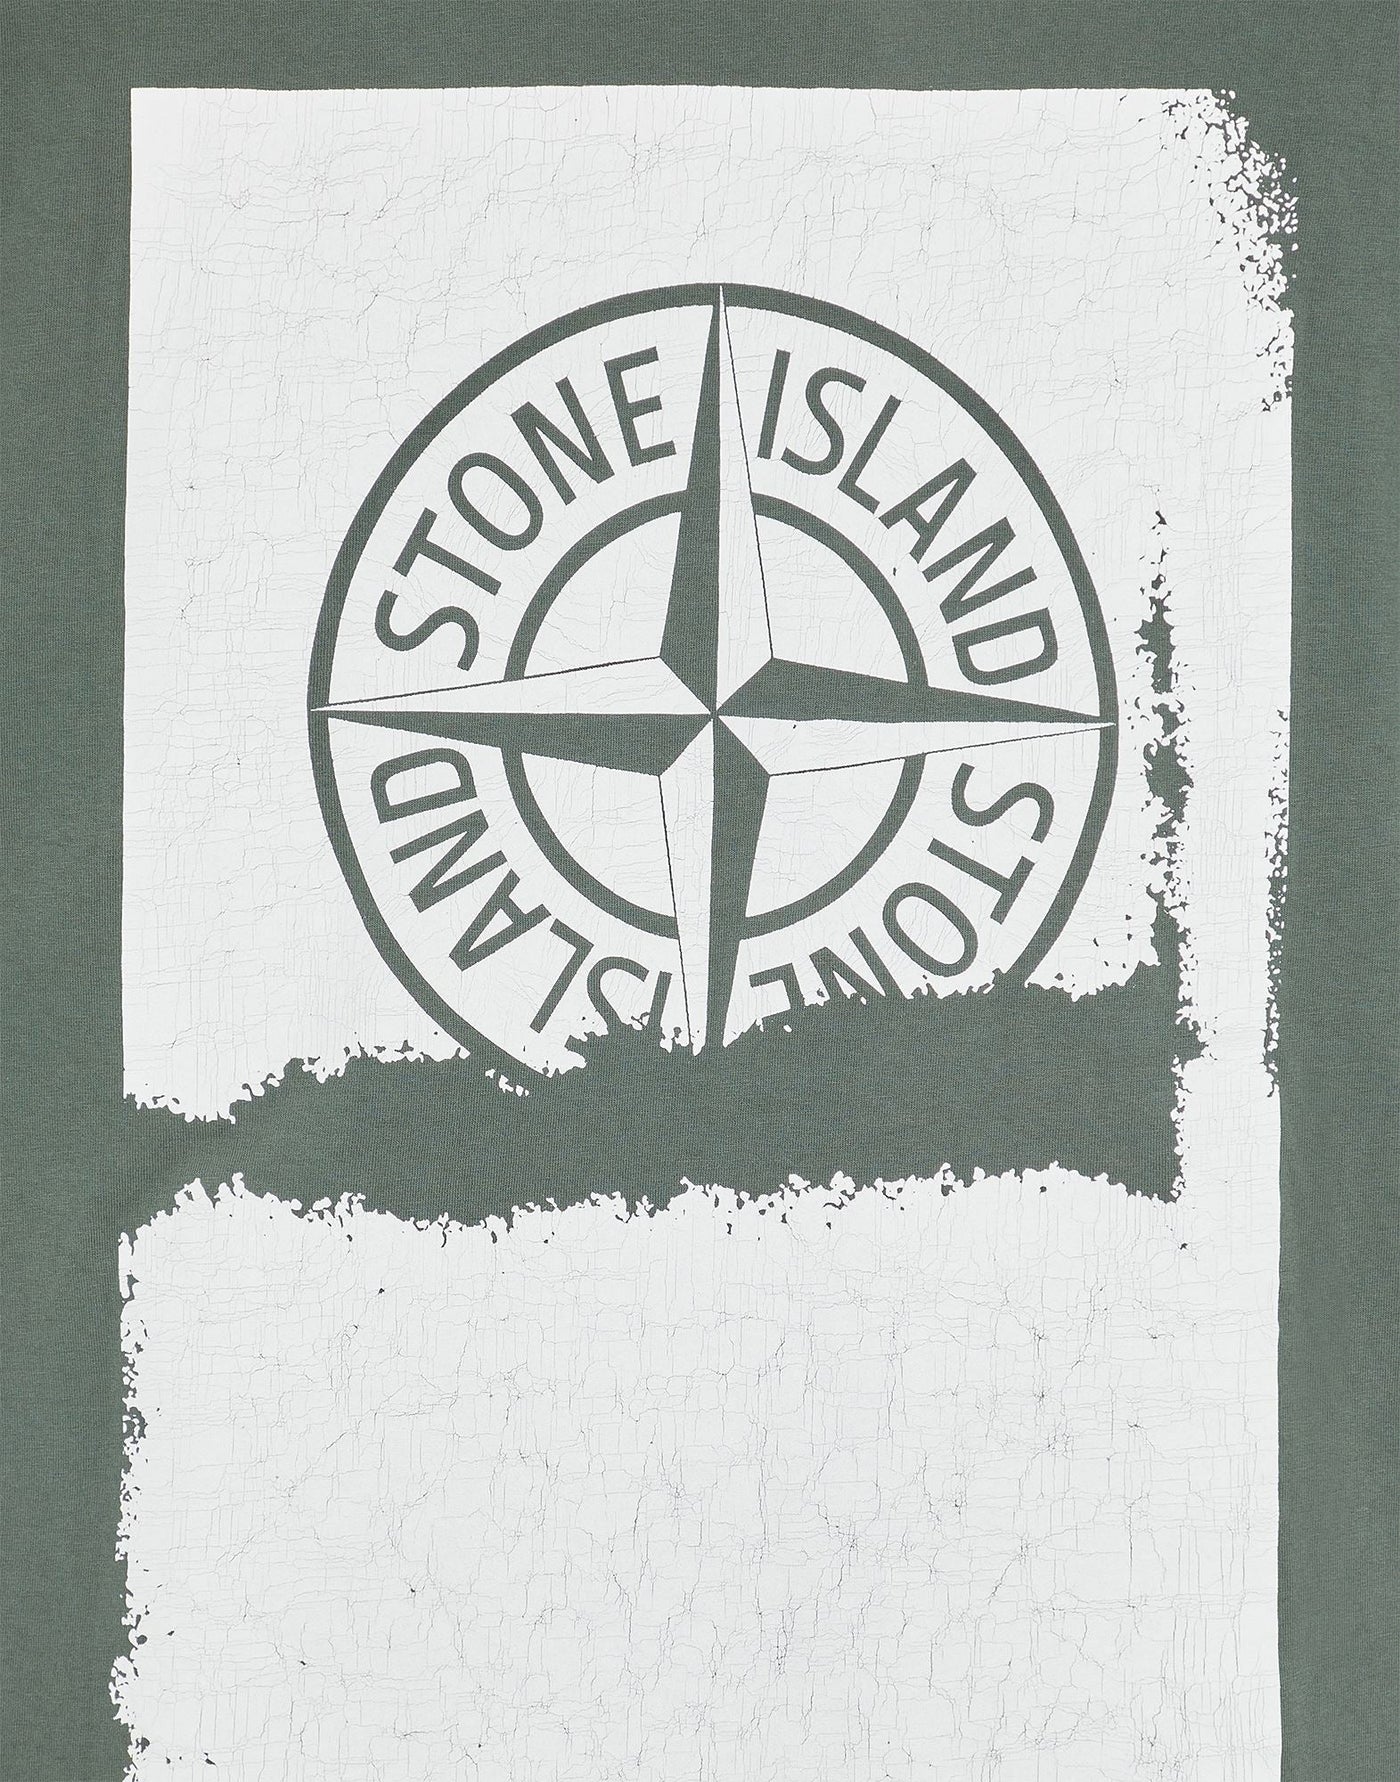 Stone Island - T Shirt vert 2RC89 'SCRATCHED PAINT ONE' PRINT - Lothaire